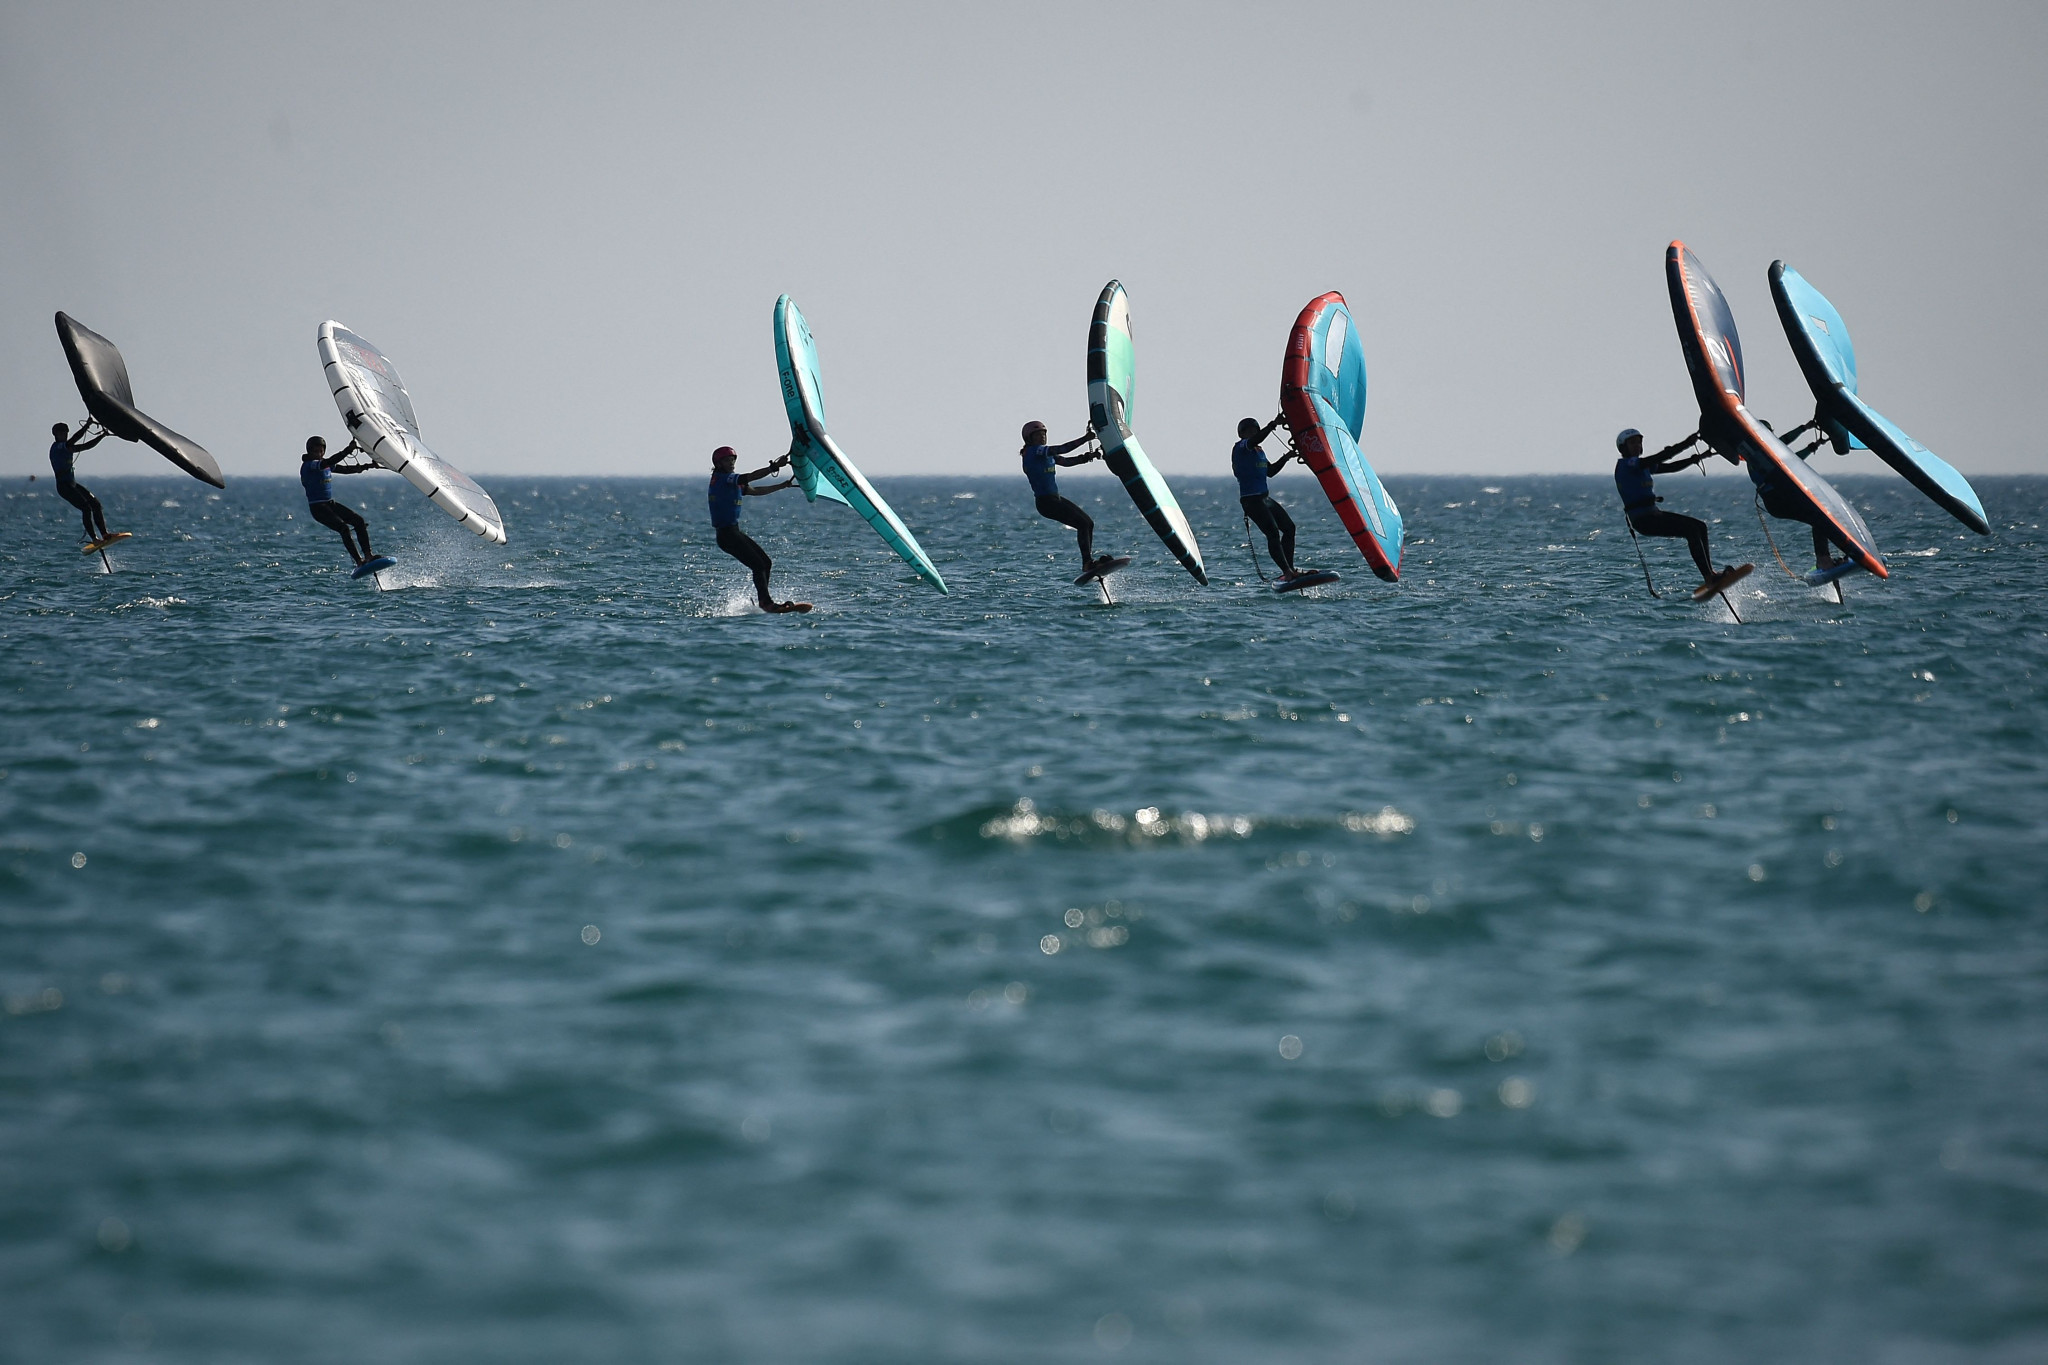 Wingfoil replaces kitefoil on the programme for Bali 2023 "following a review of the venue and the weather conditions" ©Getty Images